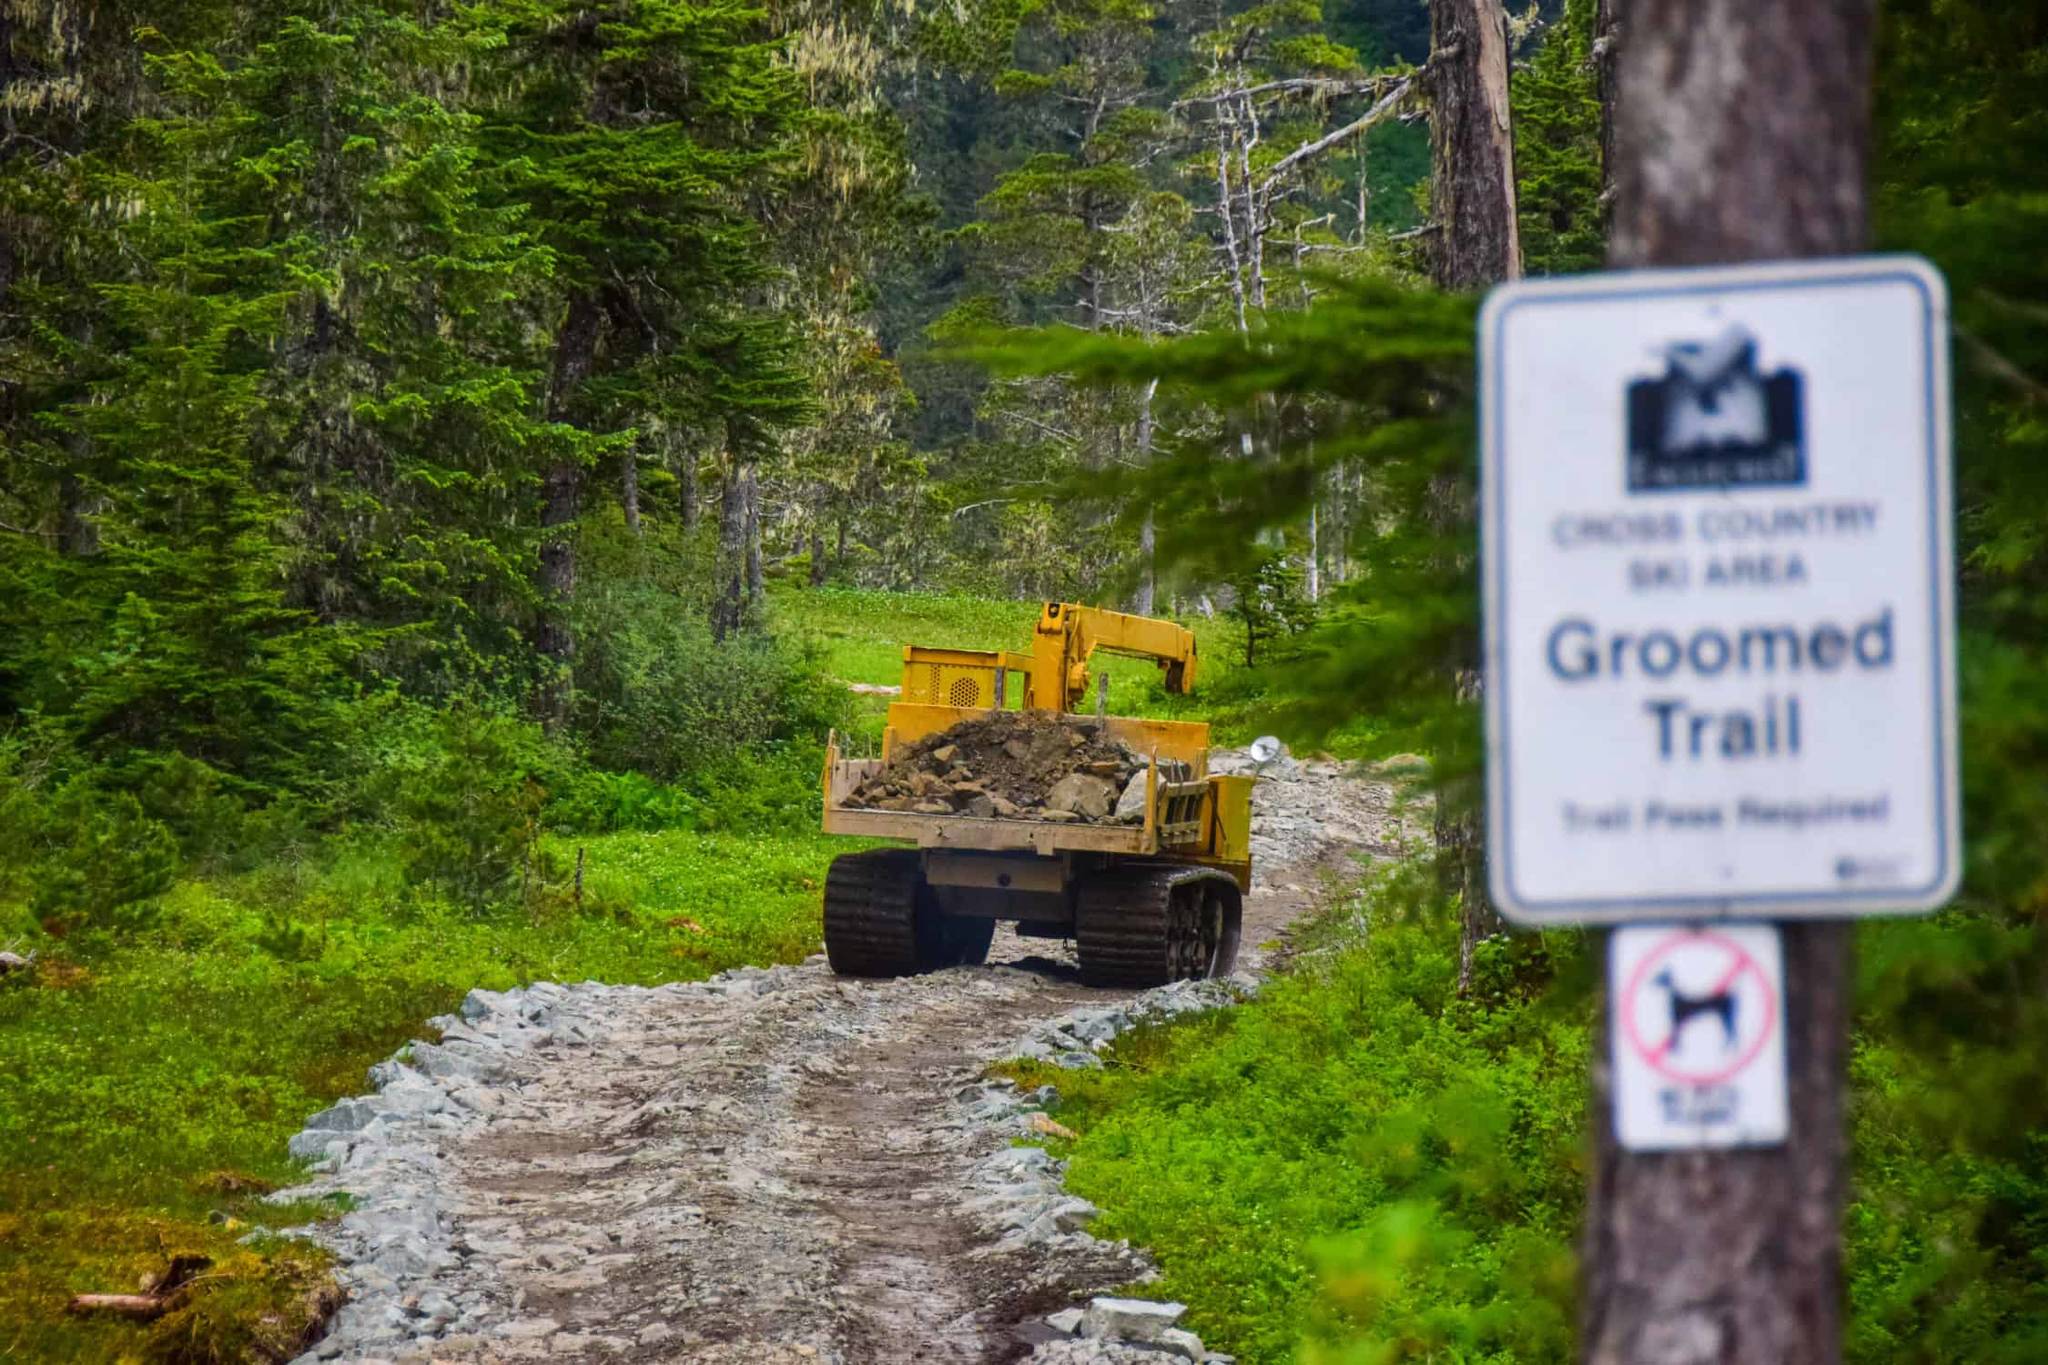 Eaglecrest Ski Area is working to improve its lower Nordic trails, hardening them to provide a better base for grooming equipment during the winter season, among other improvements this summer. (Courtesy photo / Charlie Herrington)